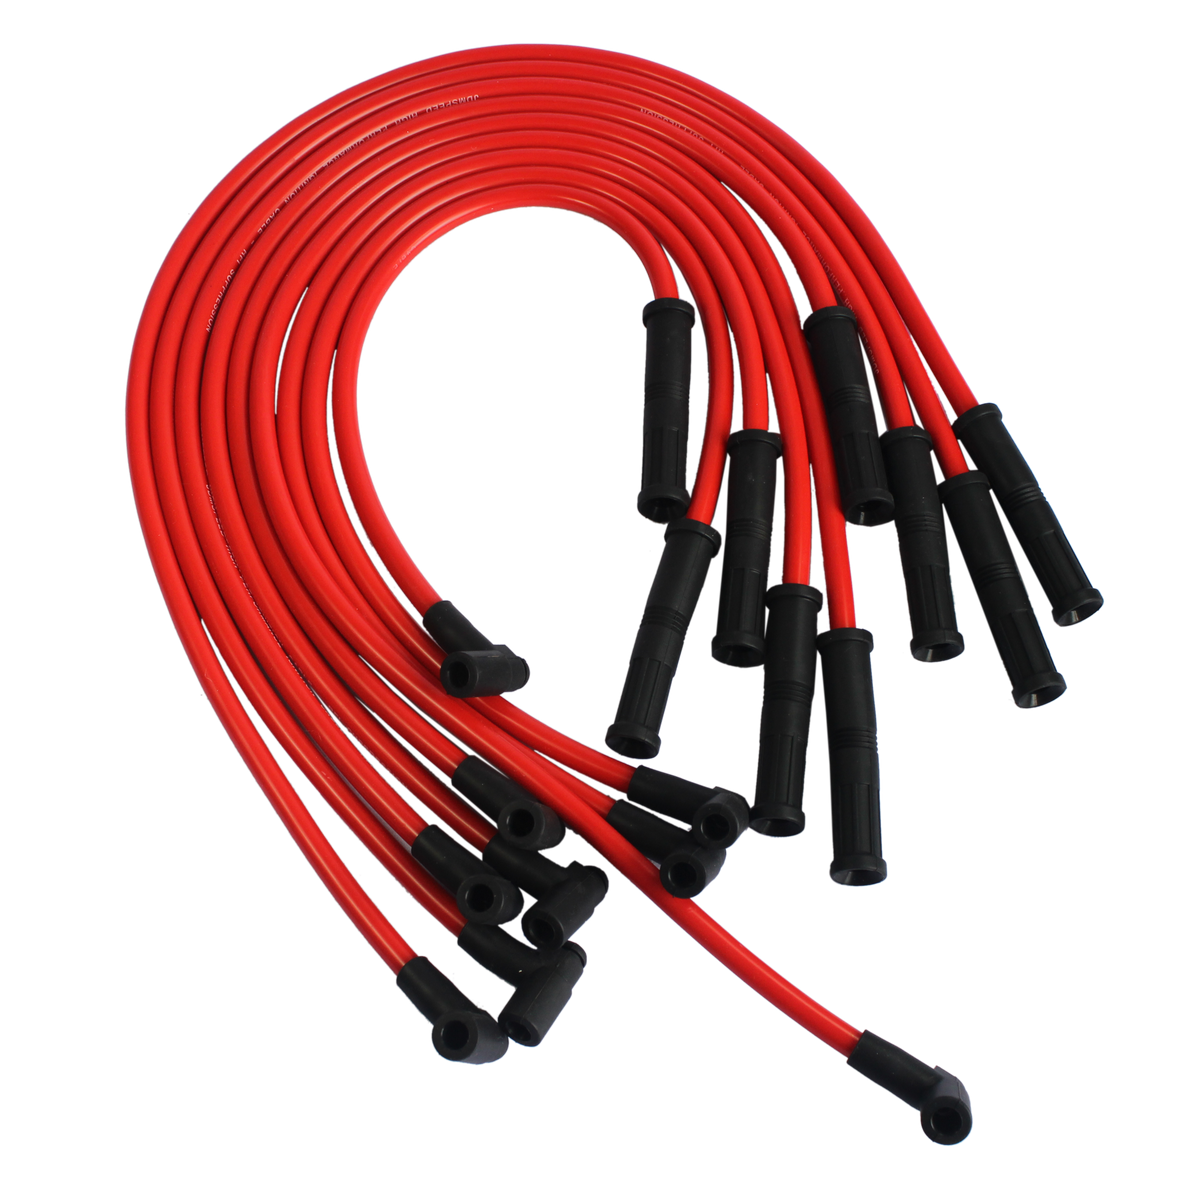  MOROSO ULTRA 40 SPARK PLUG WIRES SBC CHEVY 350 383 UNDER  HEADER HEI (RED)